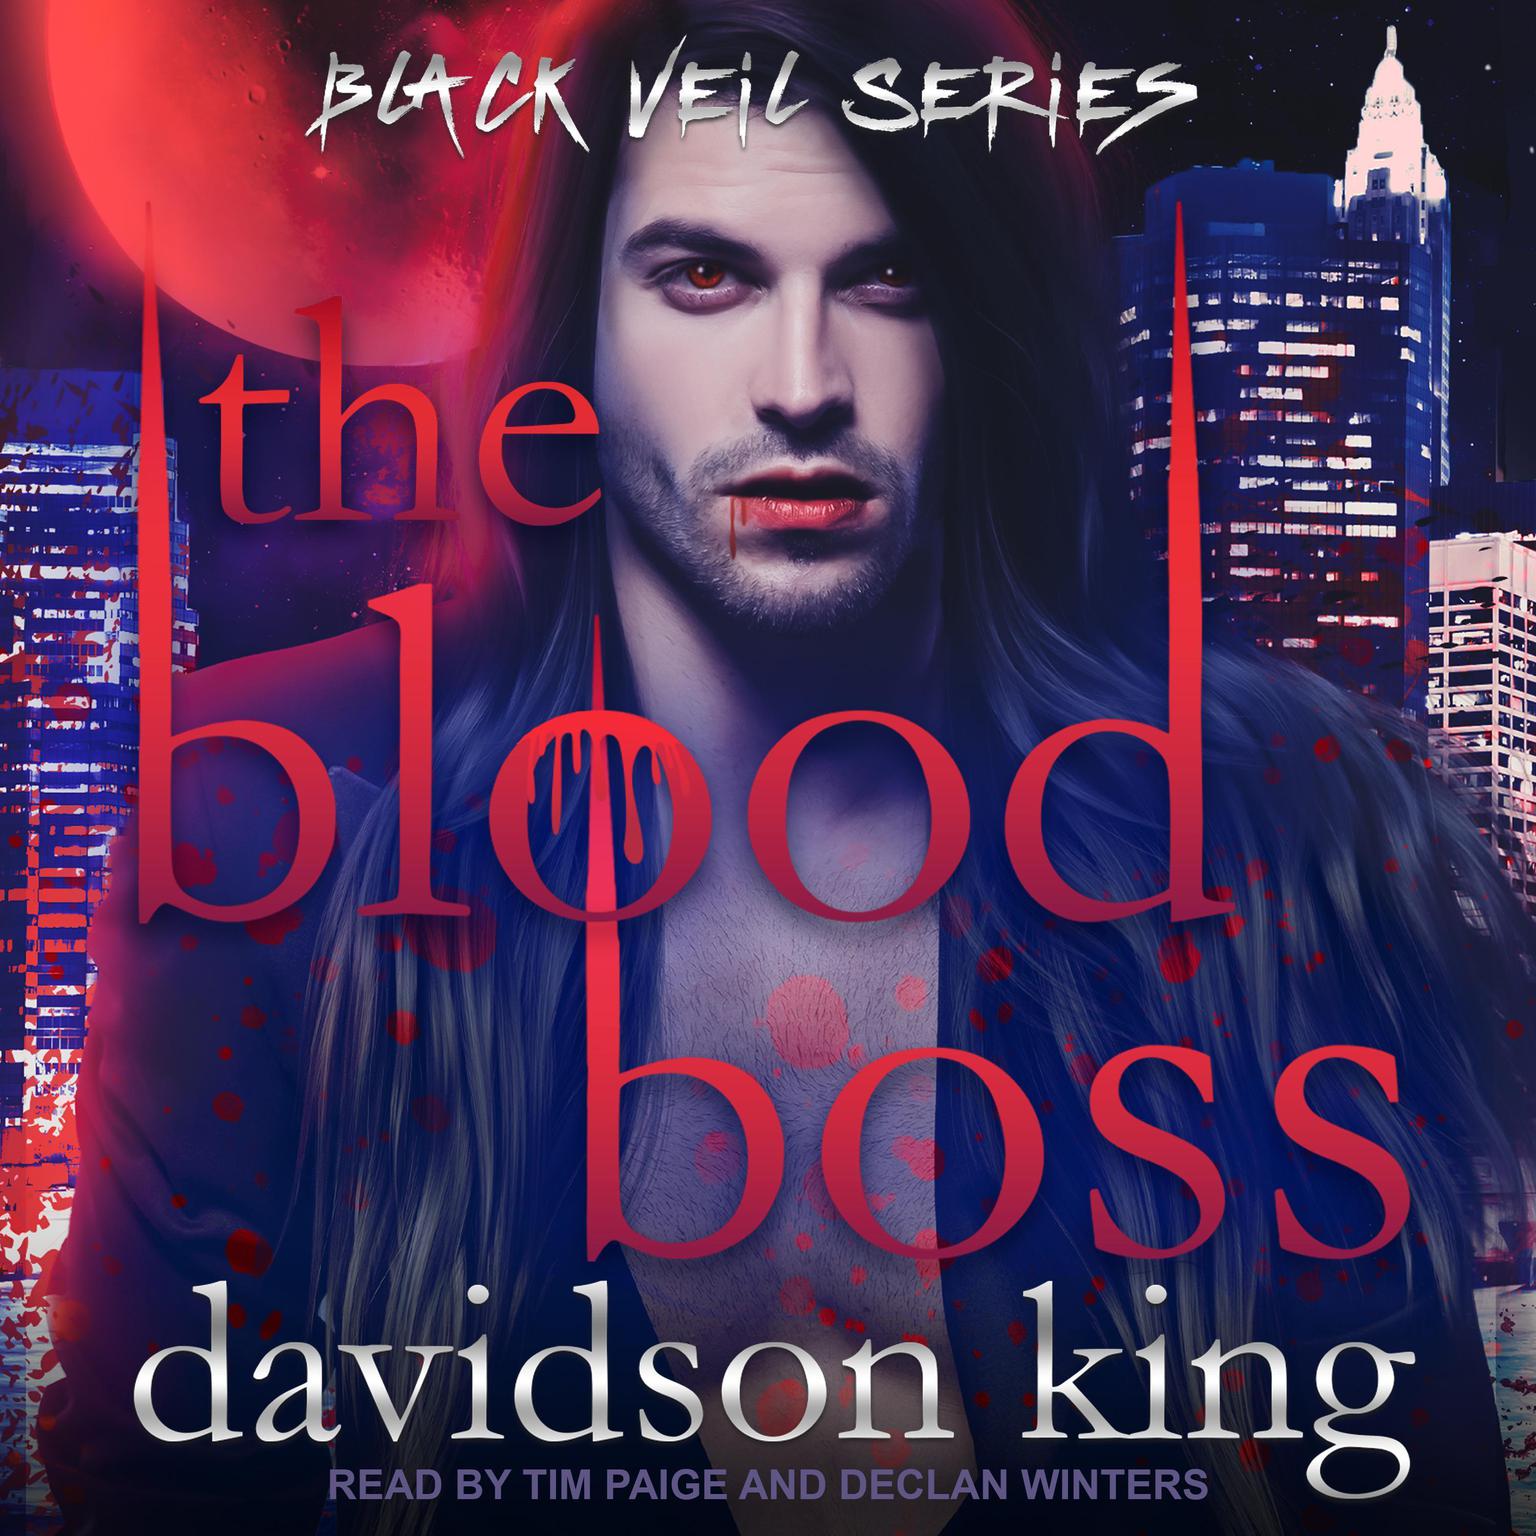 The Blood Boss Audiobook, by Davidson King